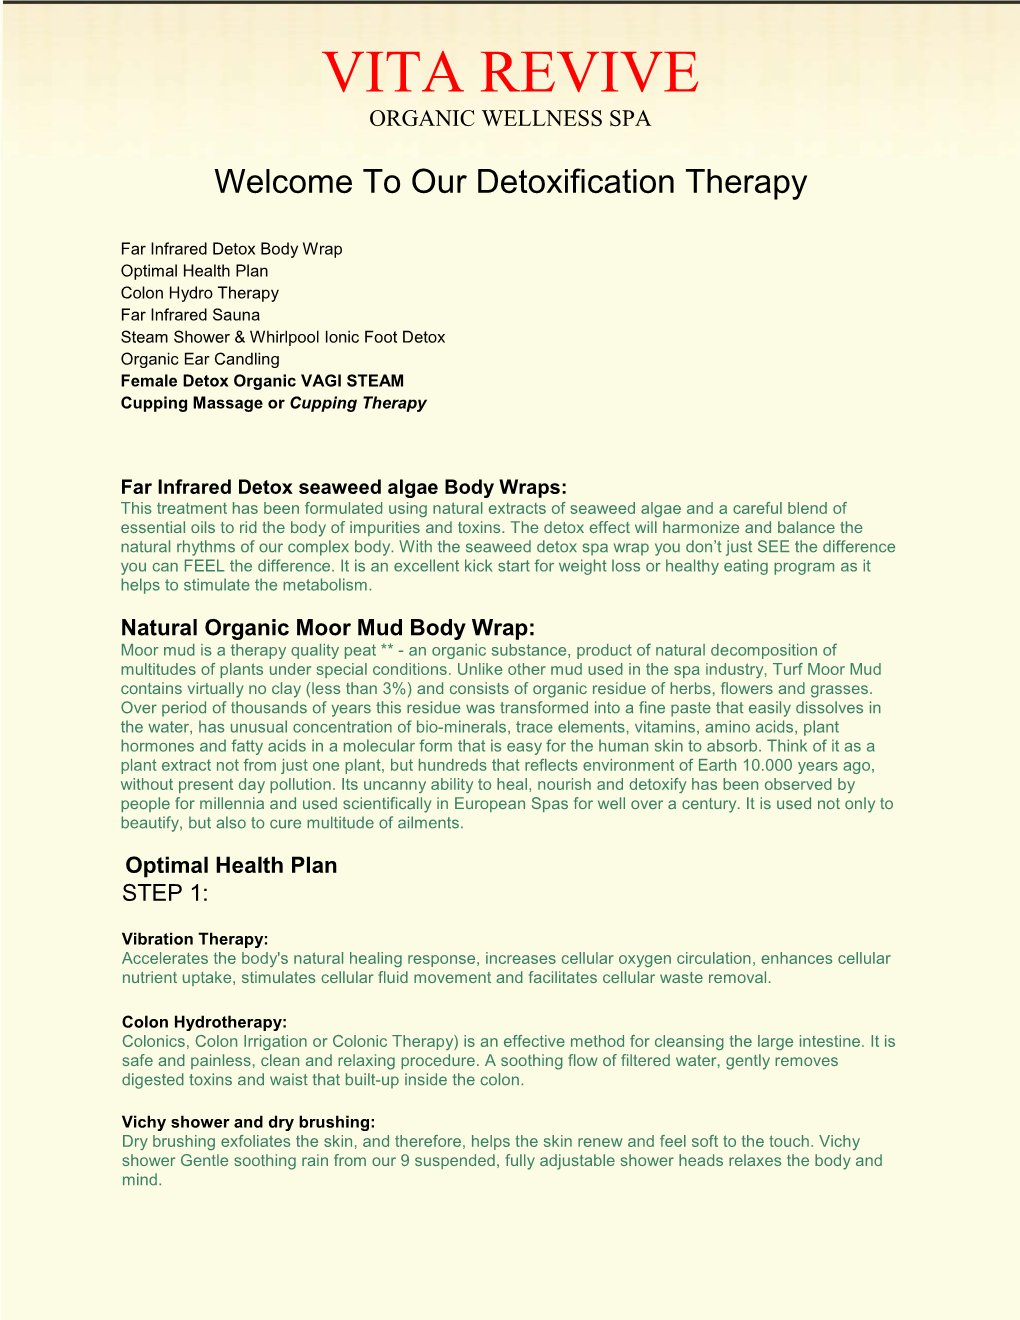 Our Detoxification Therapy